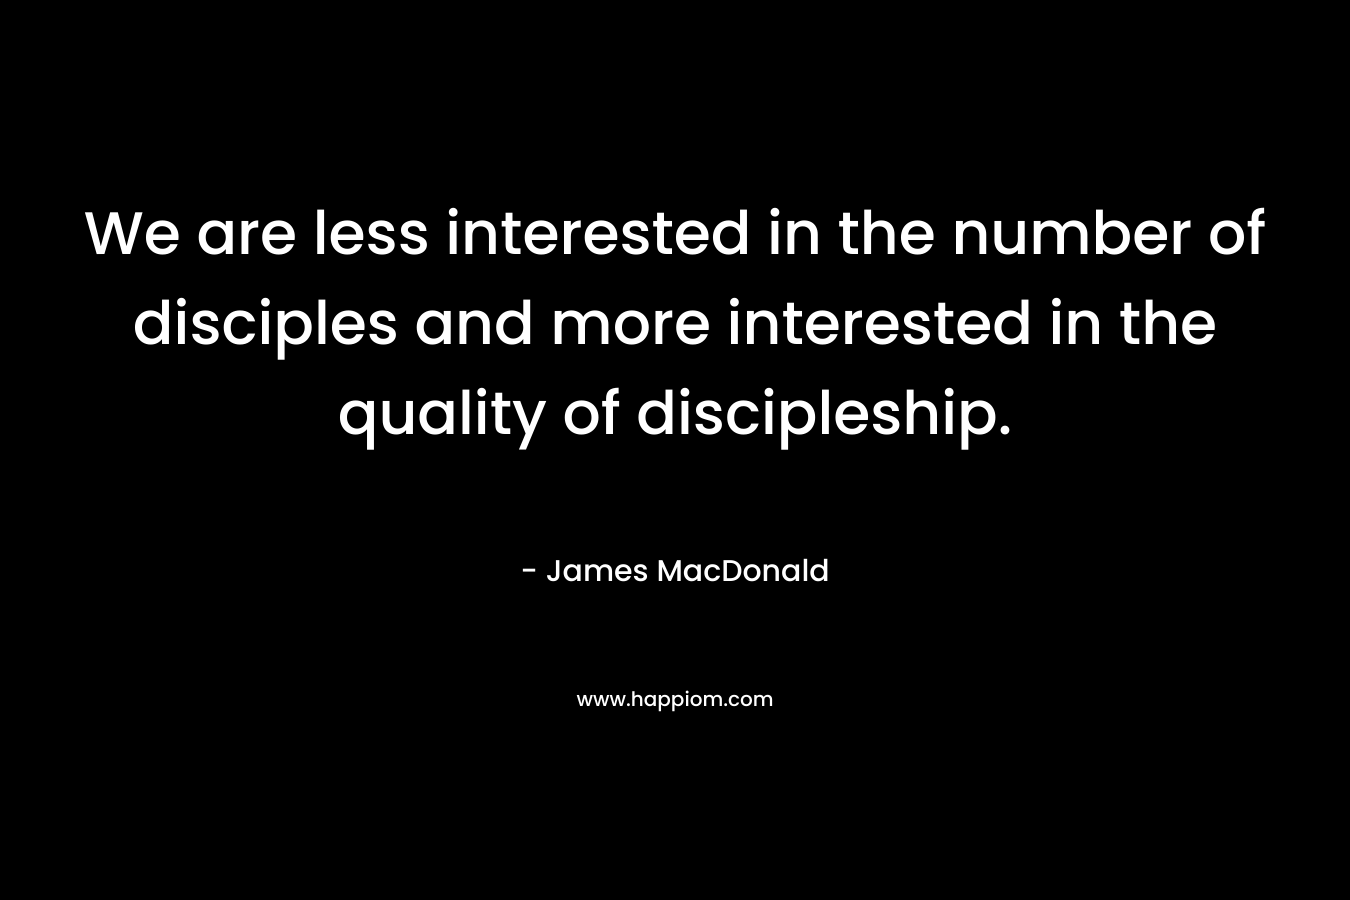 We are less interested in the number of disciples and more interested in the quality of discipleship. – James MacDonald